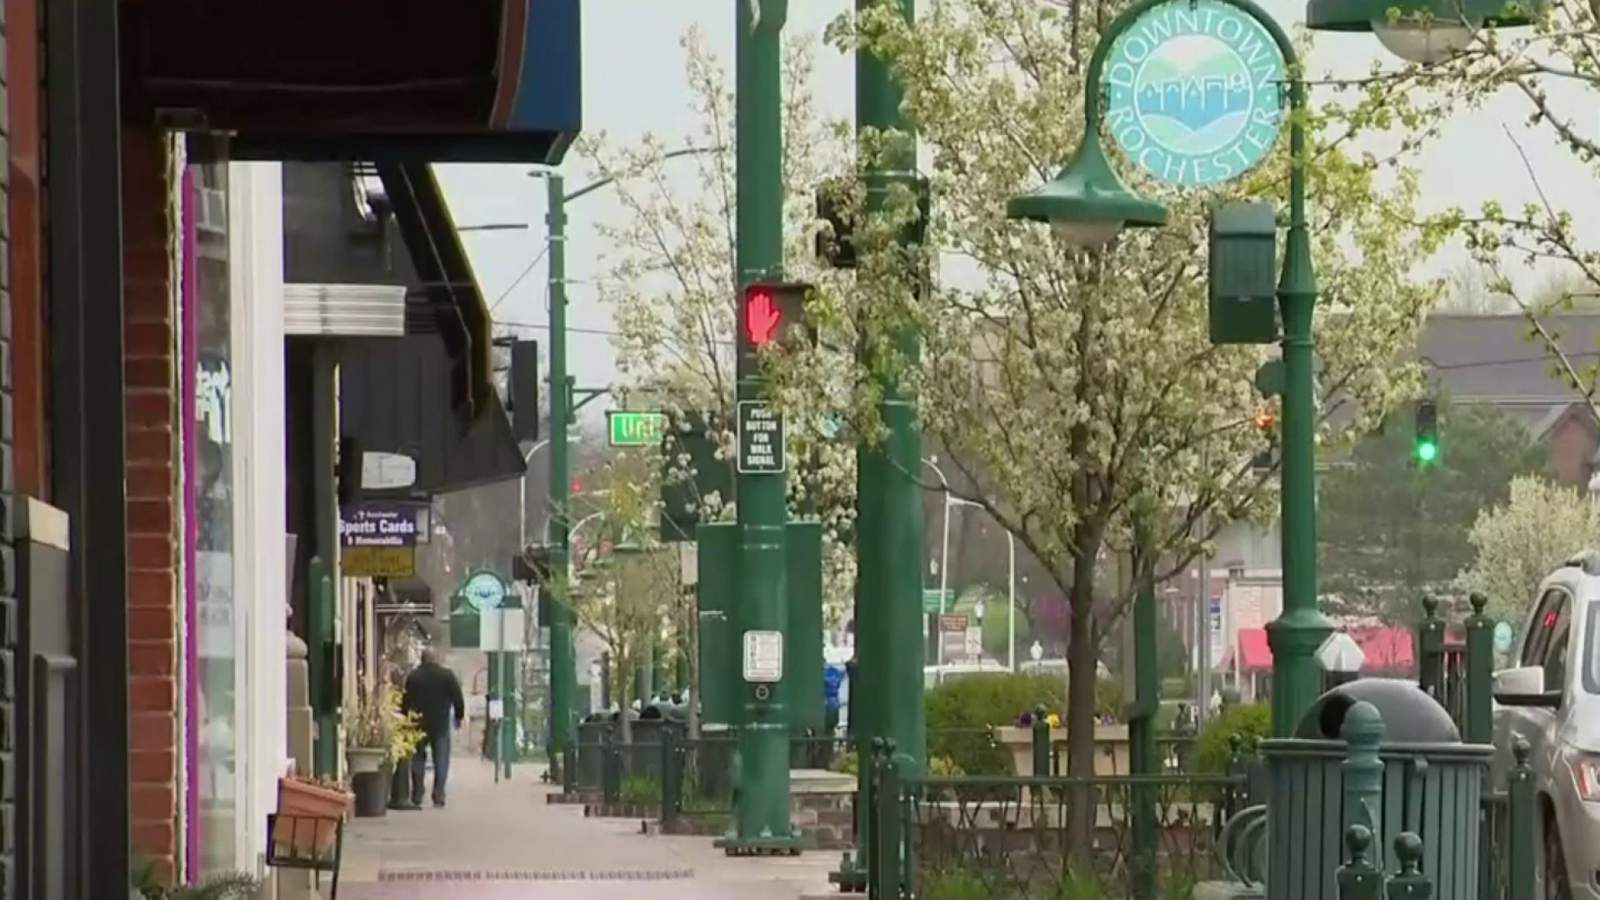 Businesses gear up to reopen in Downtown Rochester amid COVID-19 pandemic